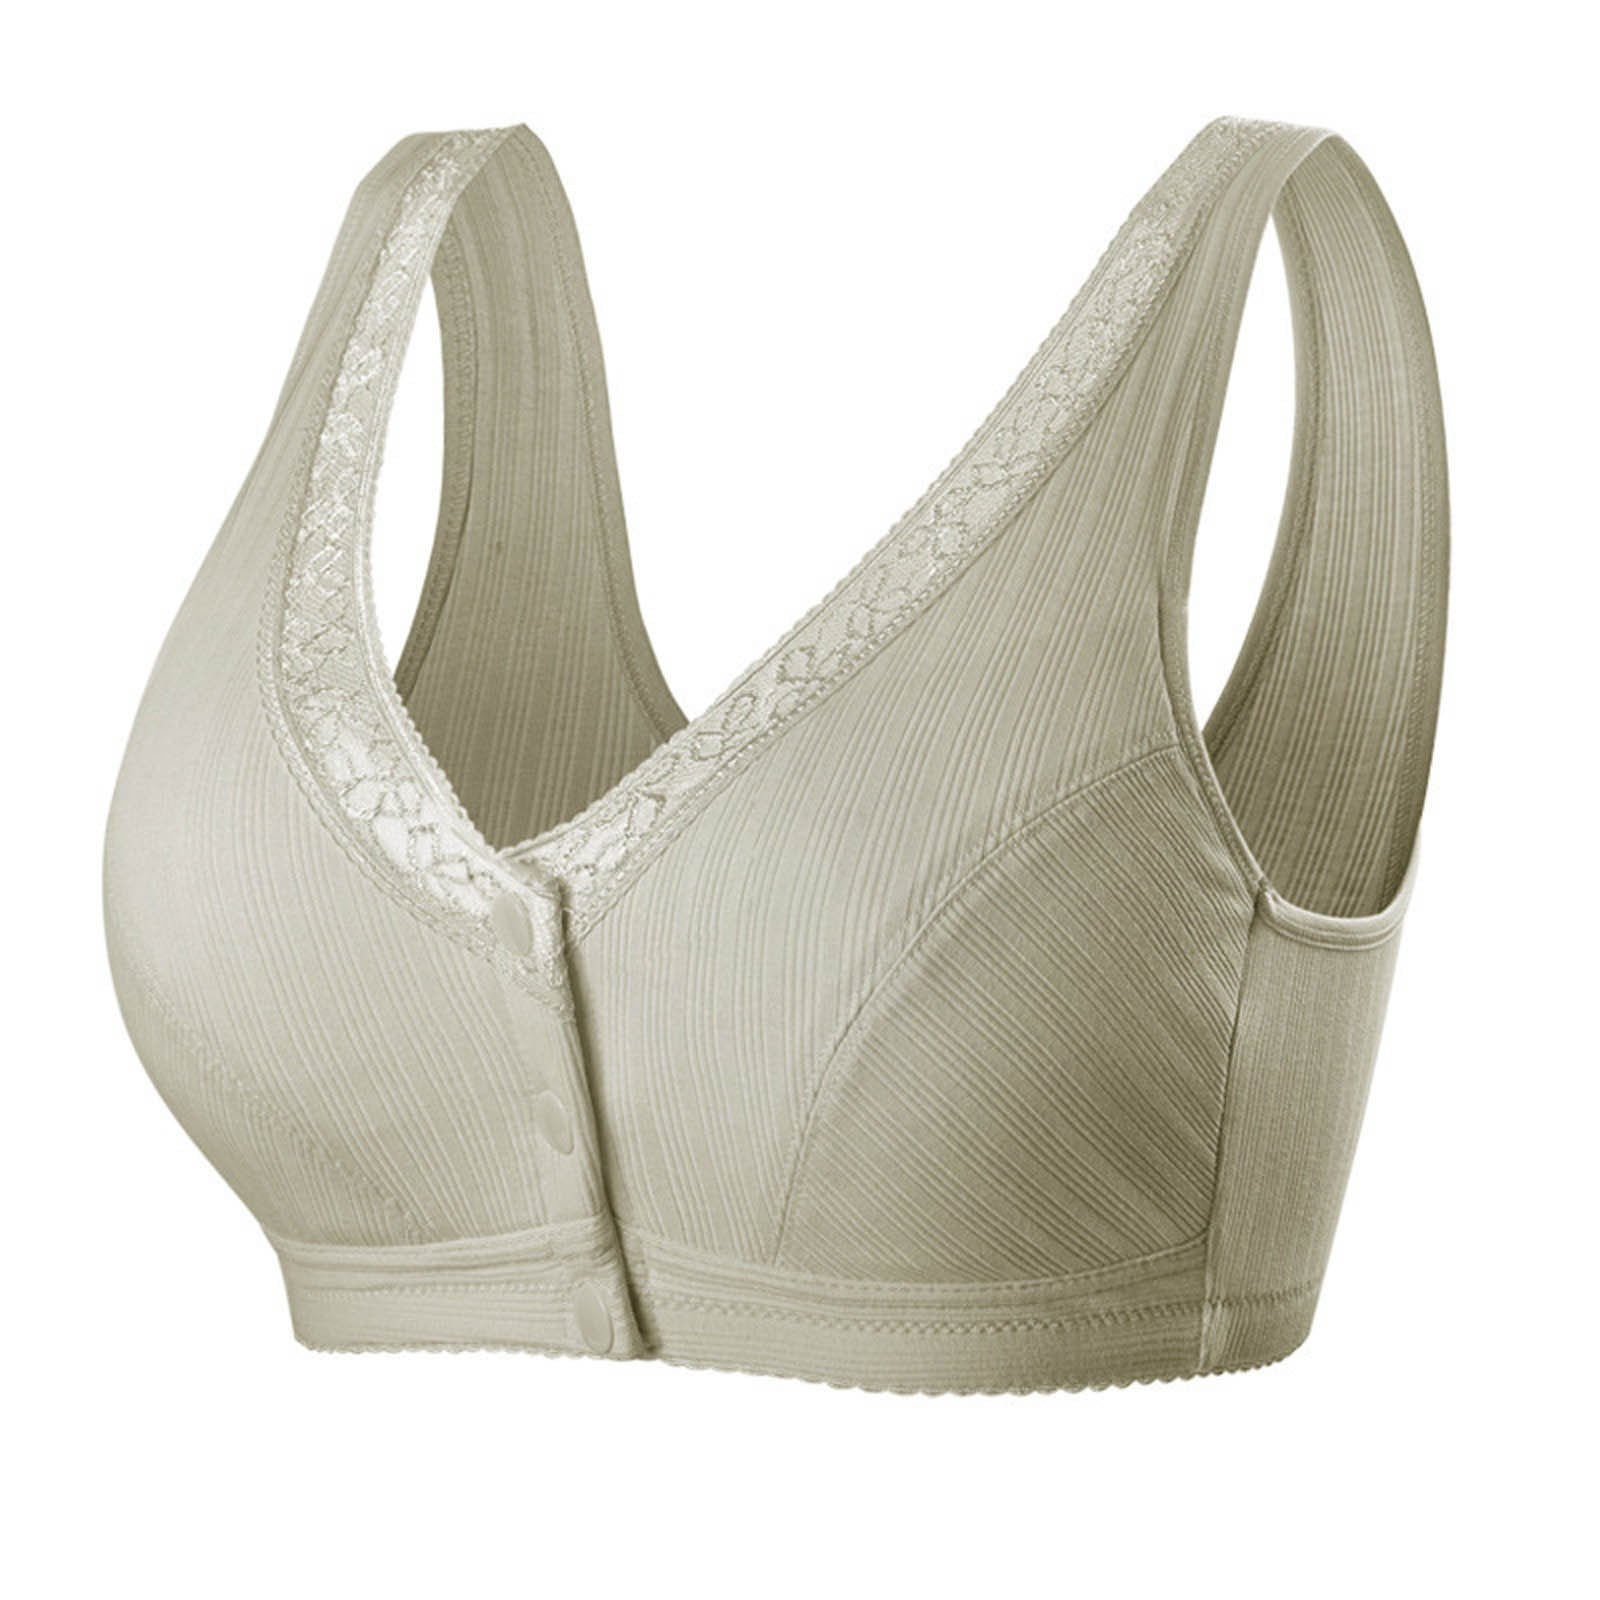 Comfortable Seamless Womens Pull Up Knix Underwear Bras With Fixed Cup Pad  And Soft Support For Anti Sagging Wear From Tiangouu, $24.74